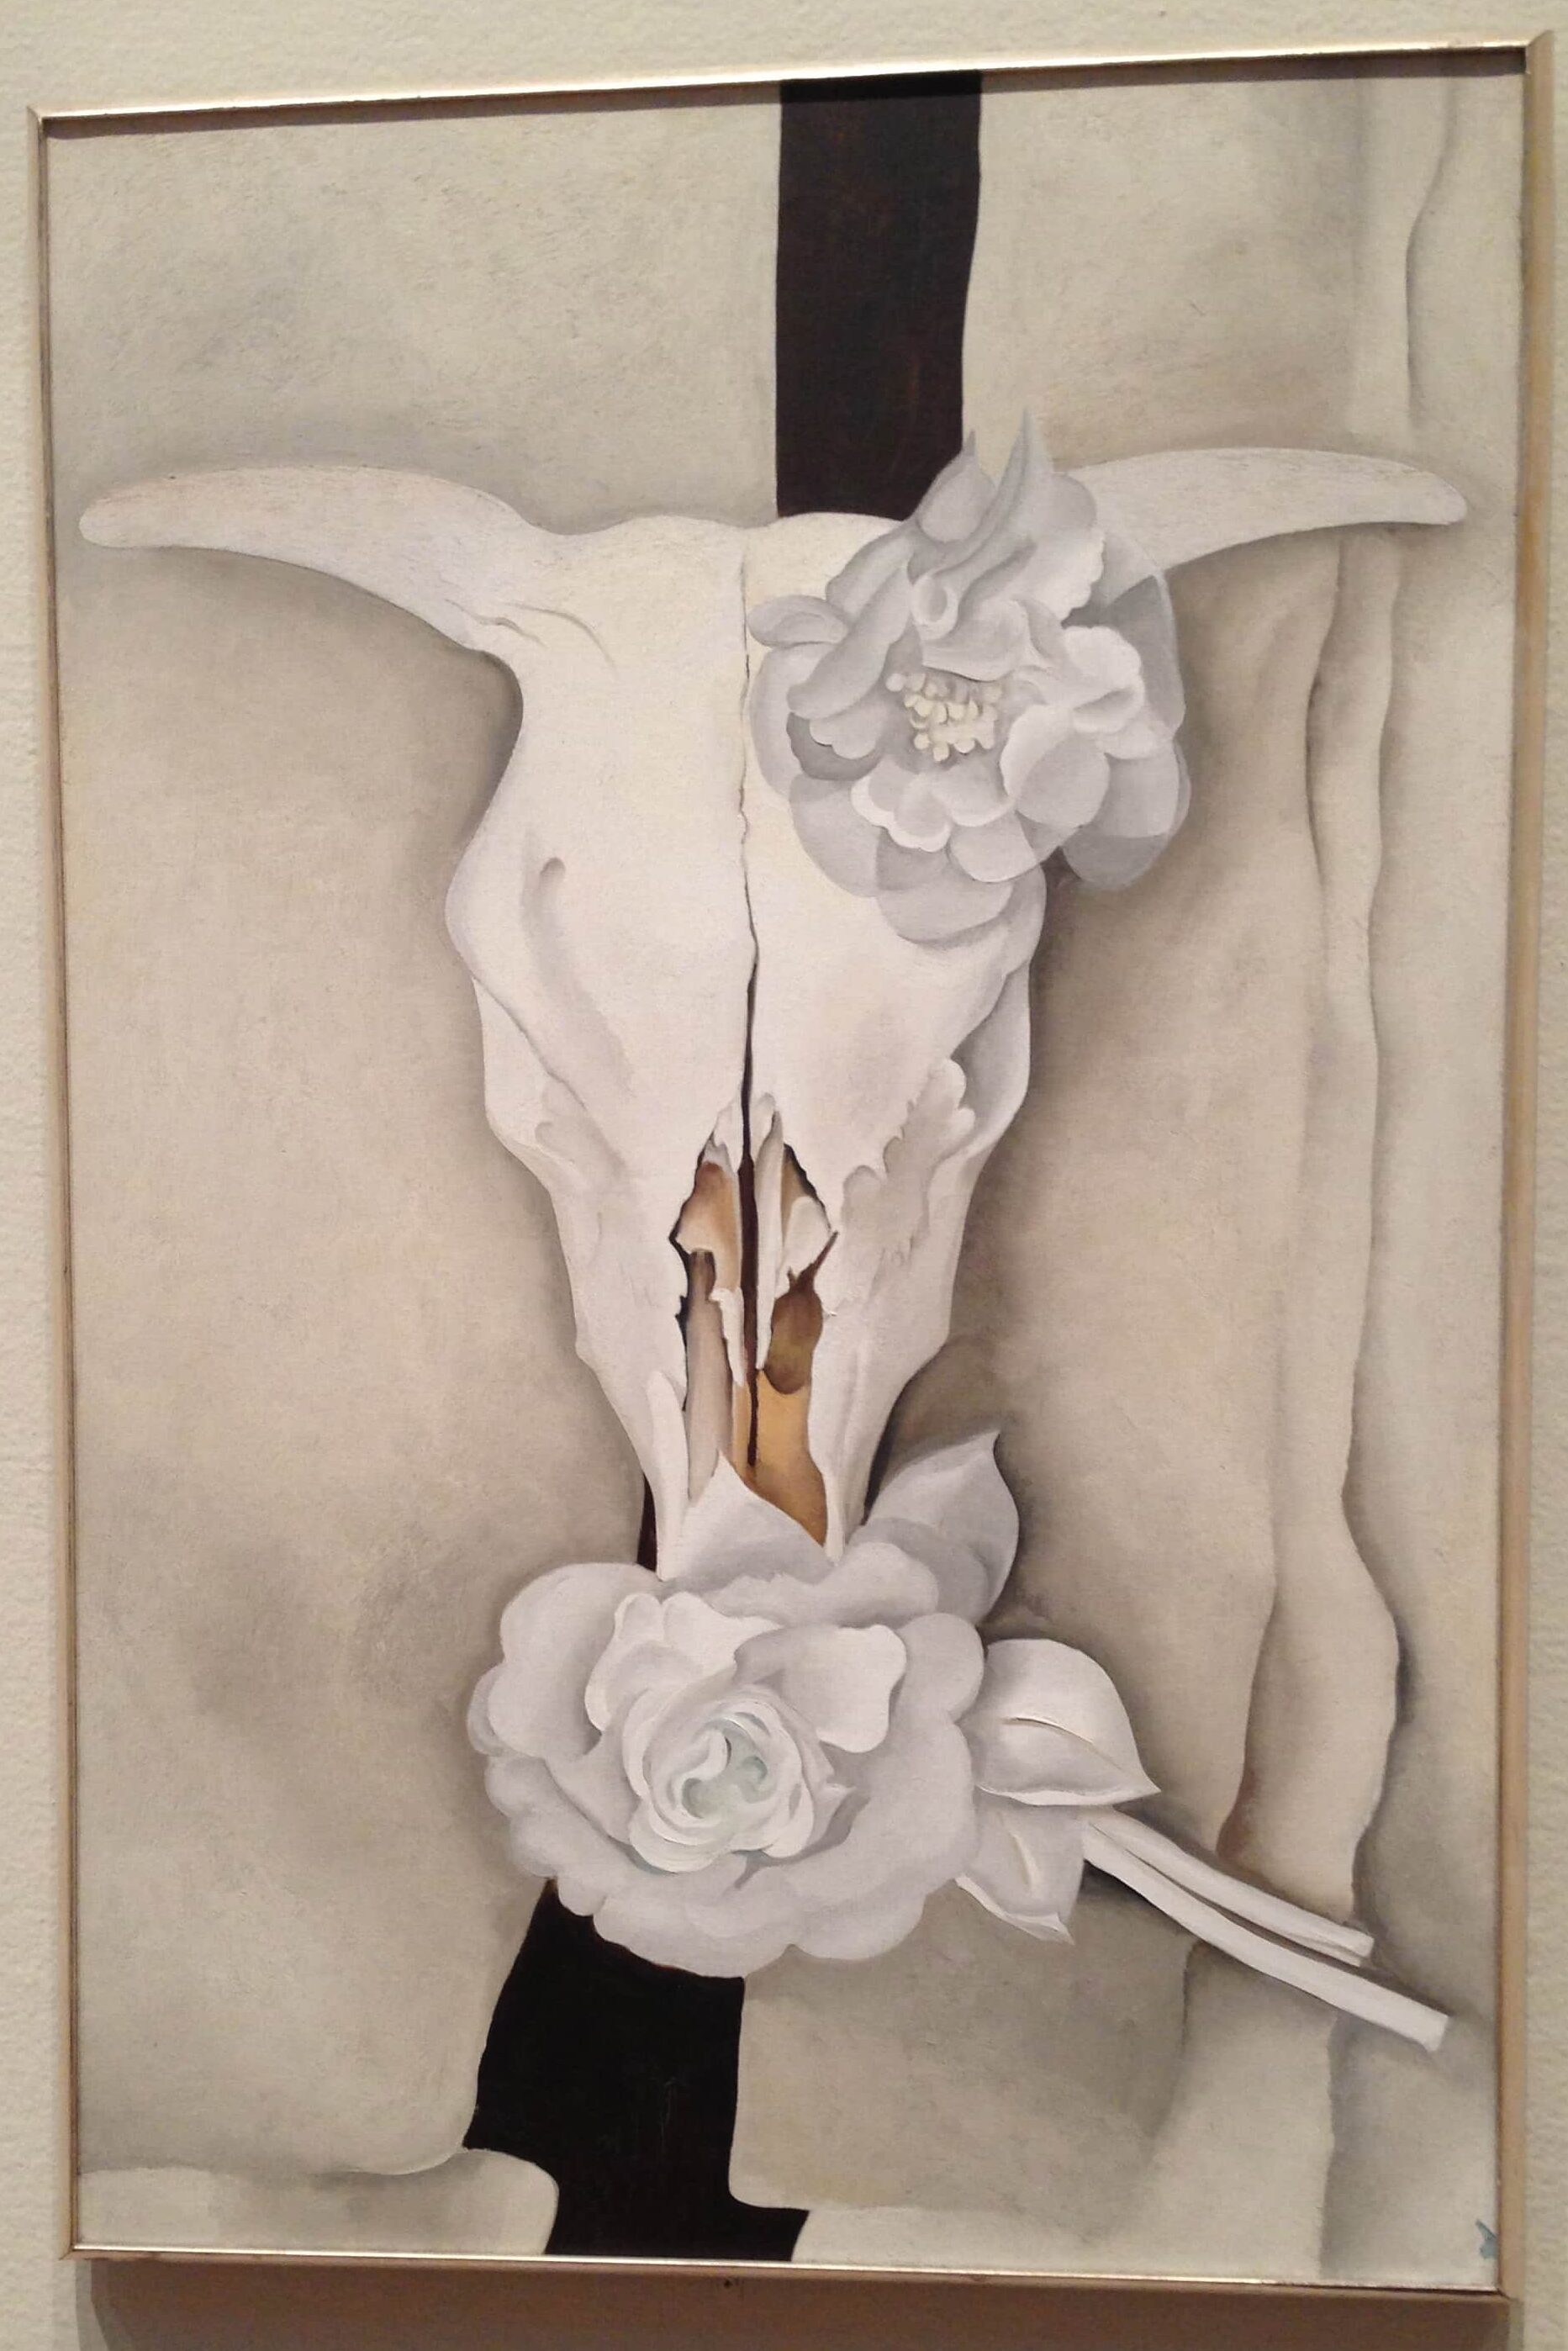 Cow's Skull with Calico Roses by Georgia O'Keeffe (1931) at the Art Institute of Chicago